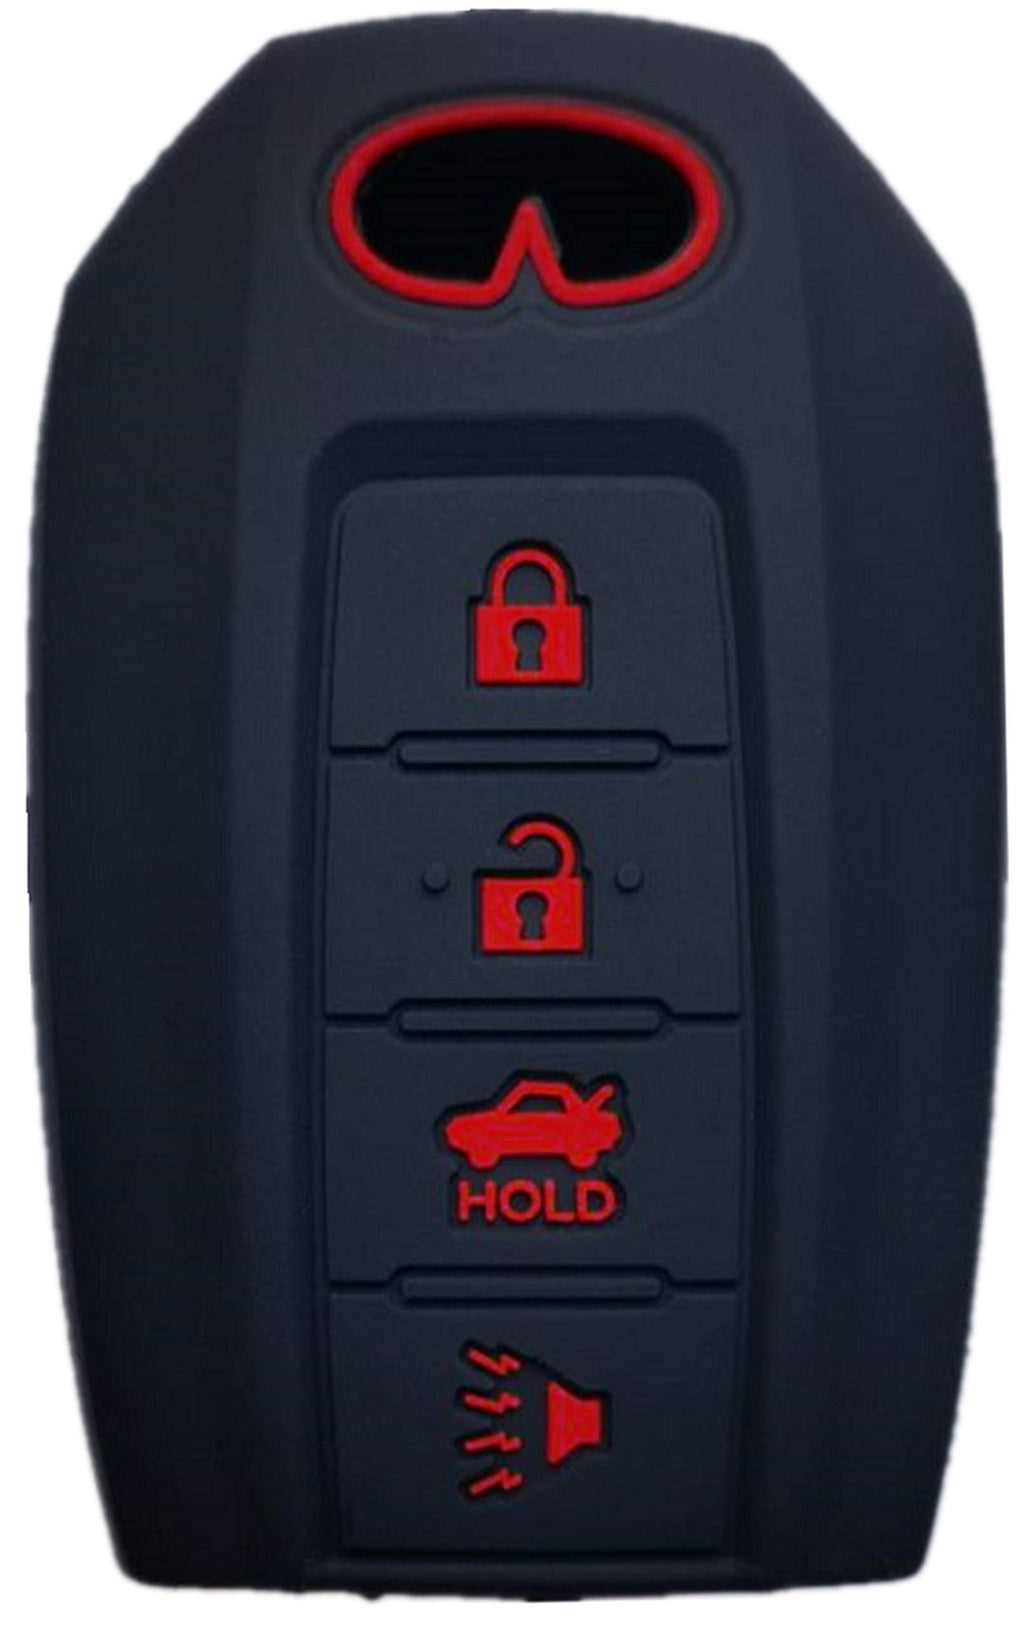 RUNZUIE Silicone Keyless Entry Remote Key Fob Cover Protector Compatible with 2019 2020 Infiniti QX60 2020 Infiniti Q50 Q60 Black with Red 4 Buttons